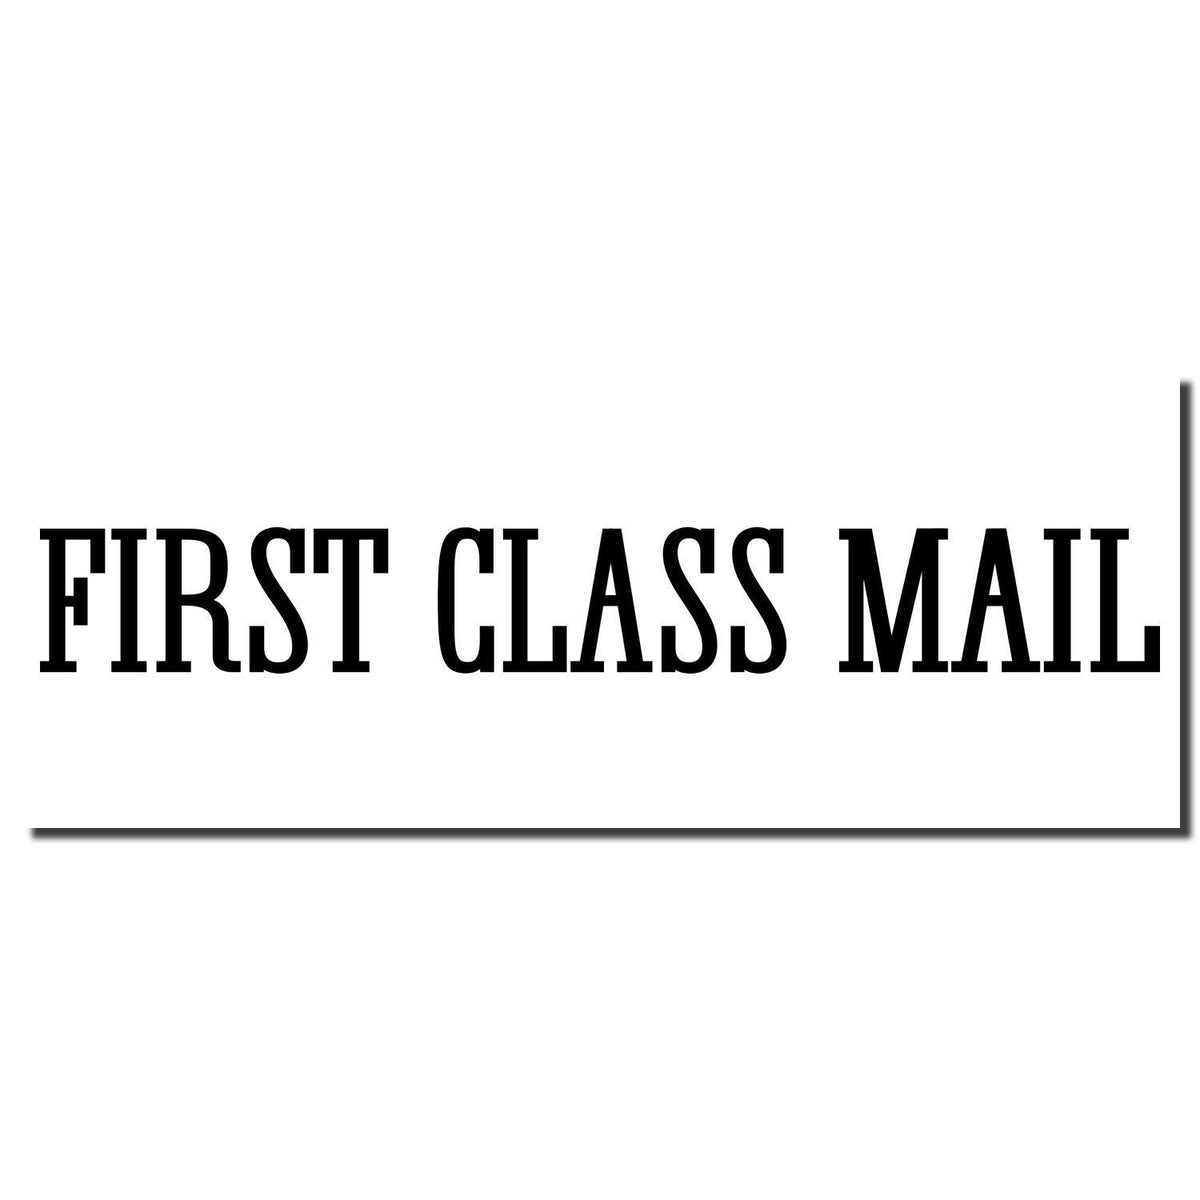 Enlarged Imprint Slim Pre-Inked Times First Class Mail Stamp Sample